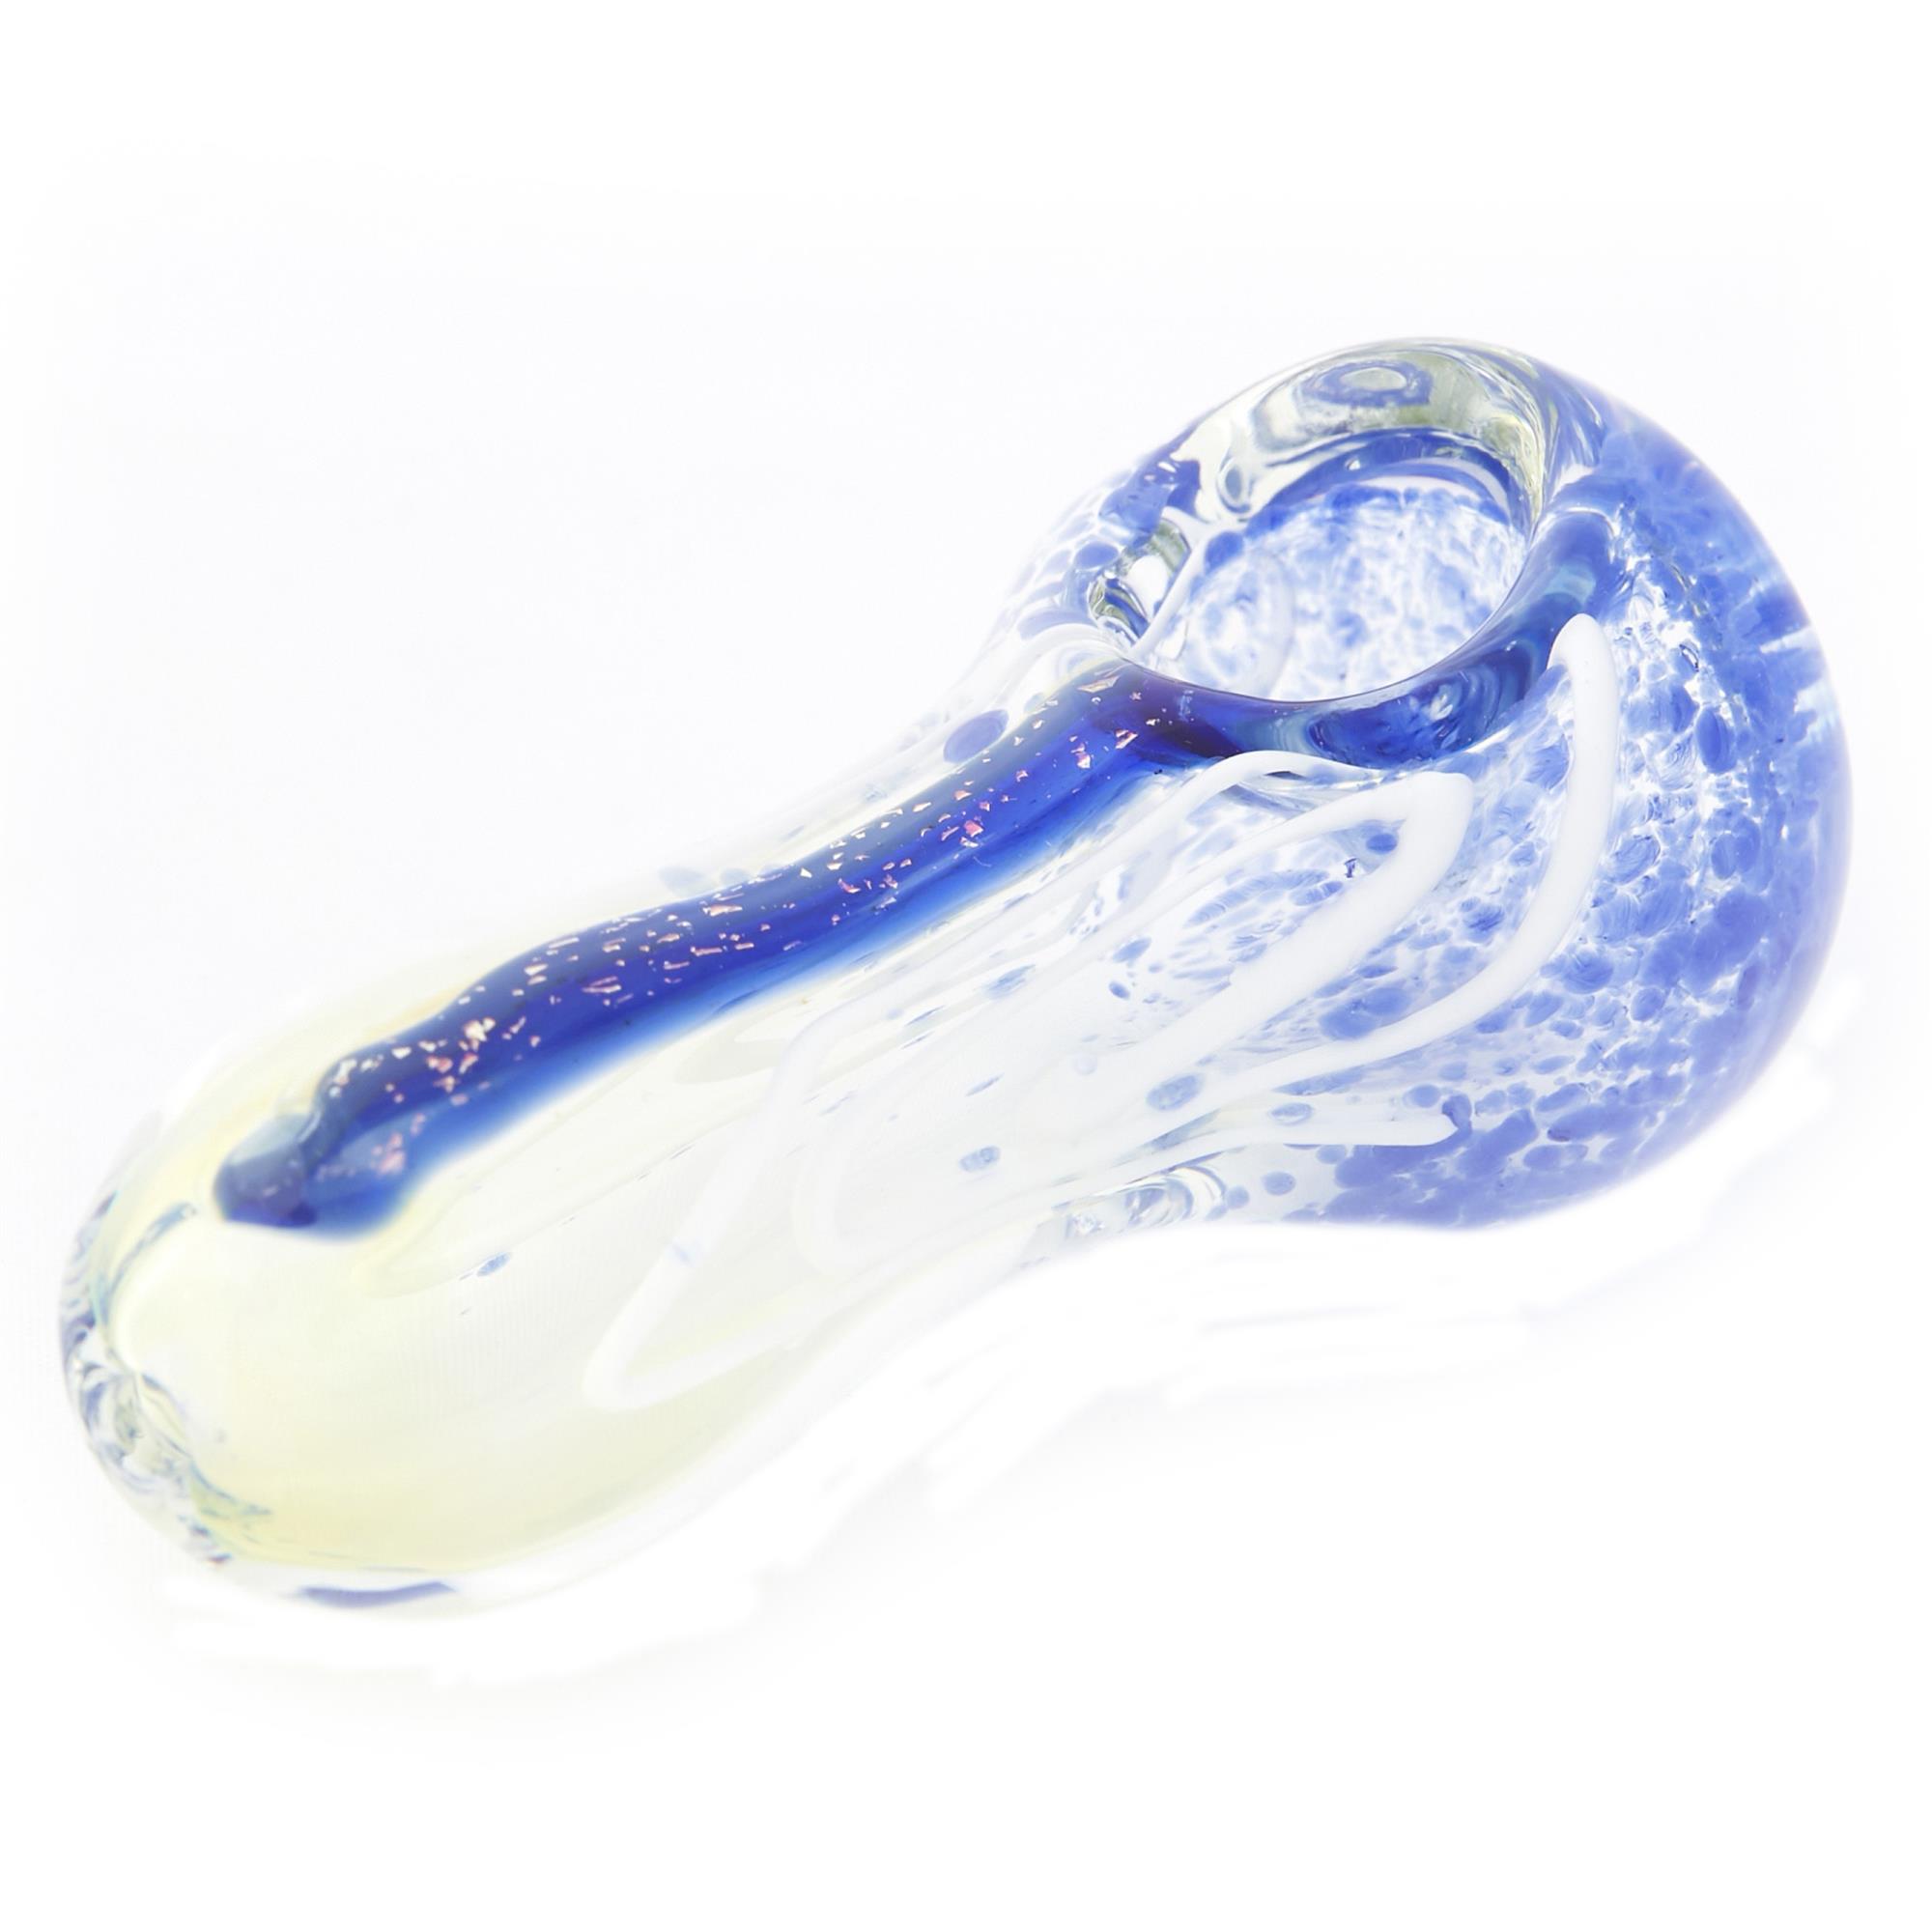 ICE ICE BABY SPOON PIPE